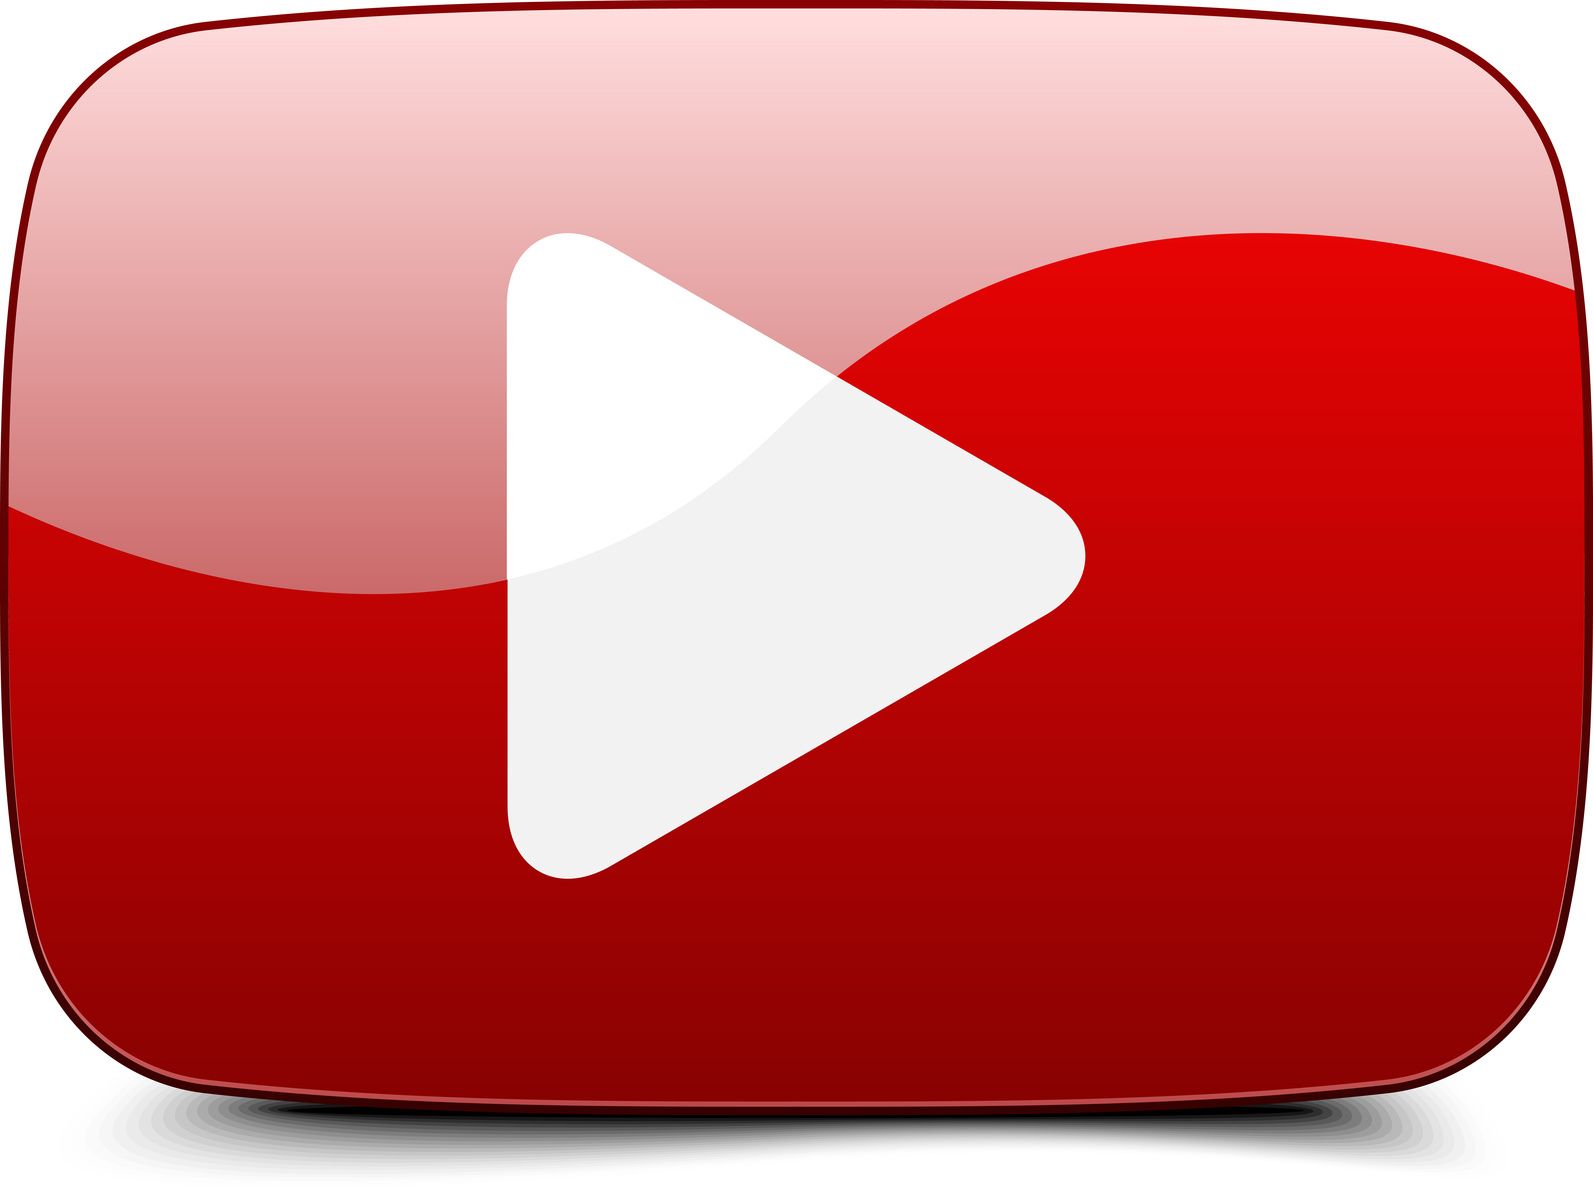 Free Like Button Transparent Youtube, Download Free Clip Art, Free Clip Art on Clipart Library